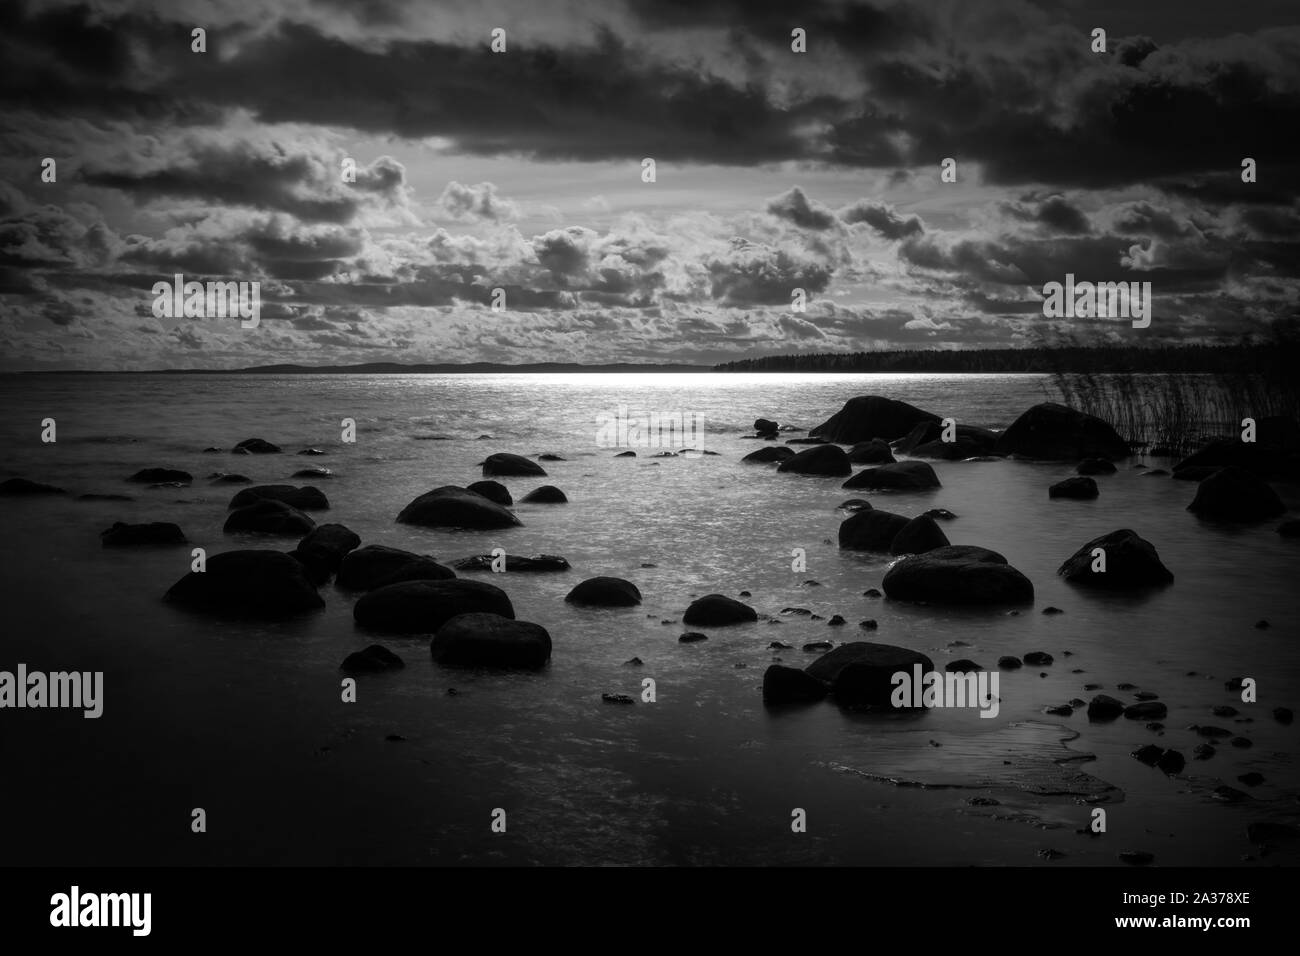 Dramatic black and white landscape of a lake with stones. Stock Photo